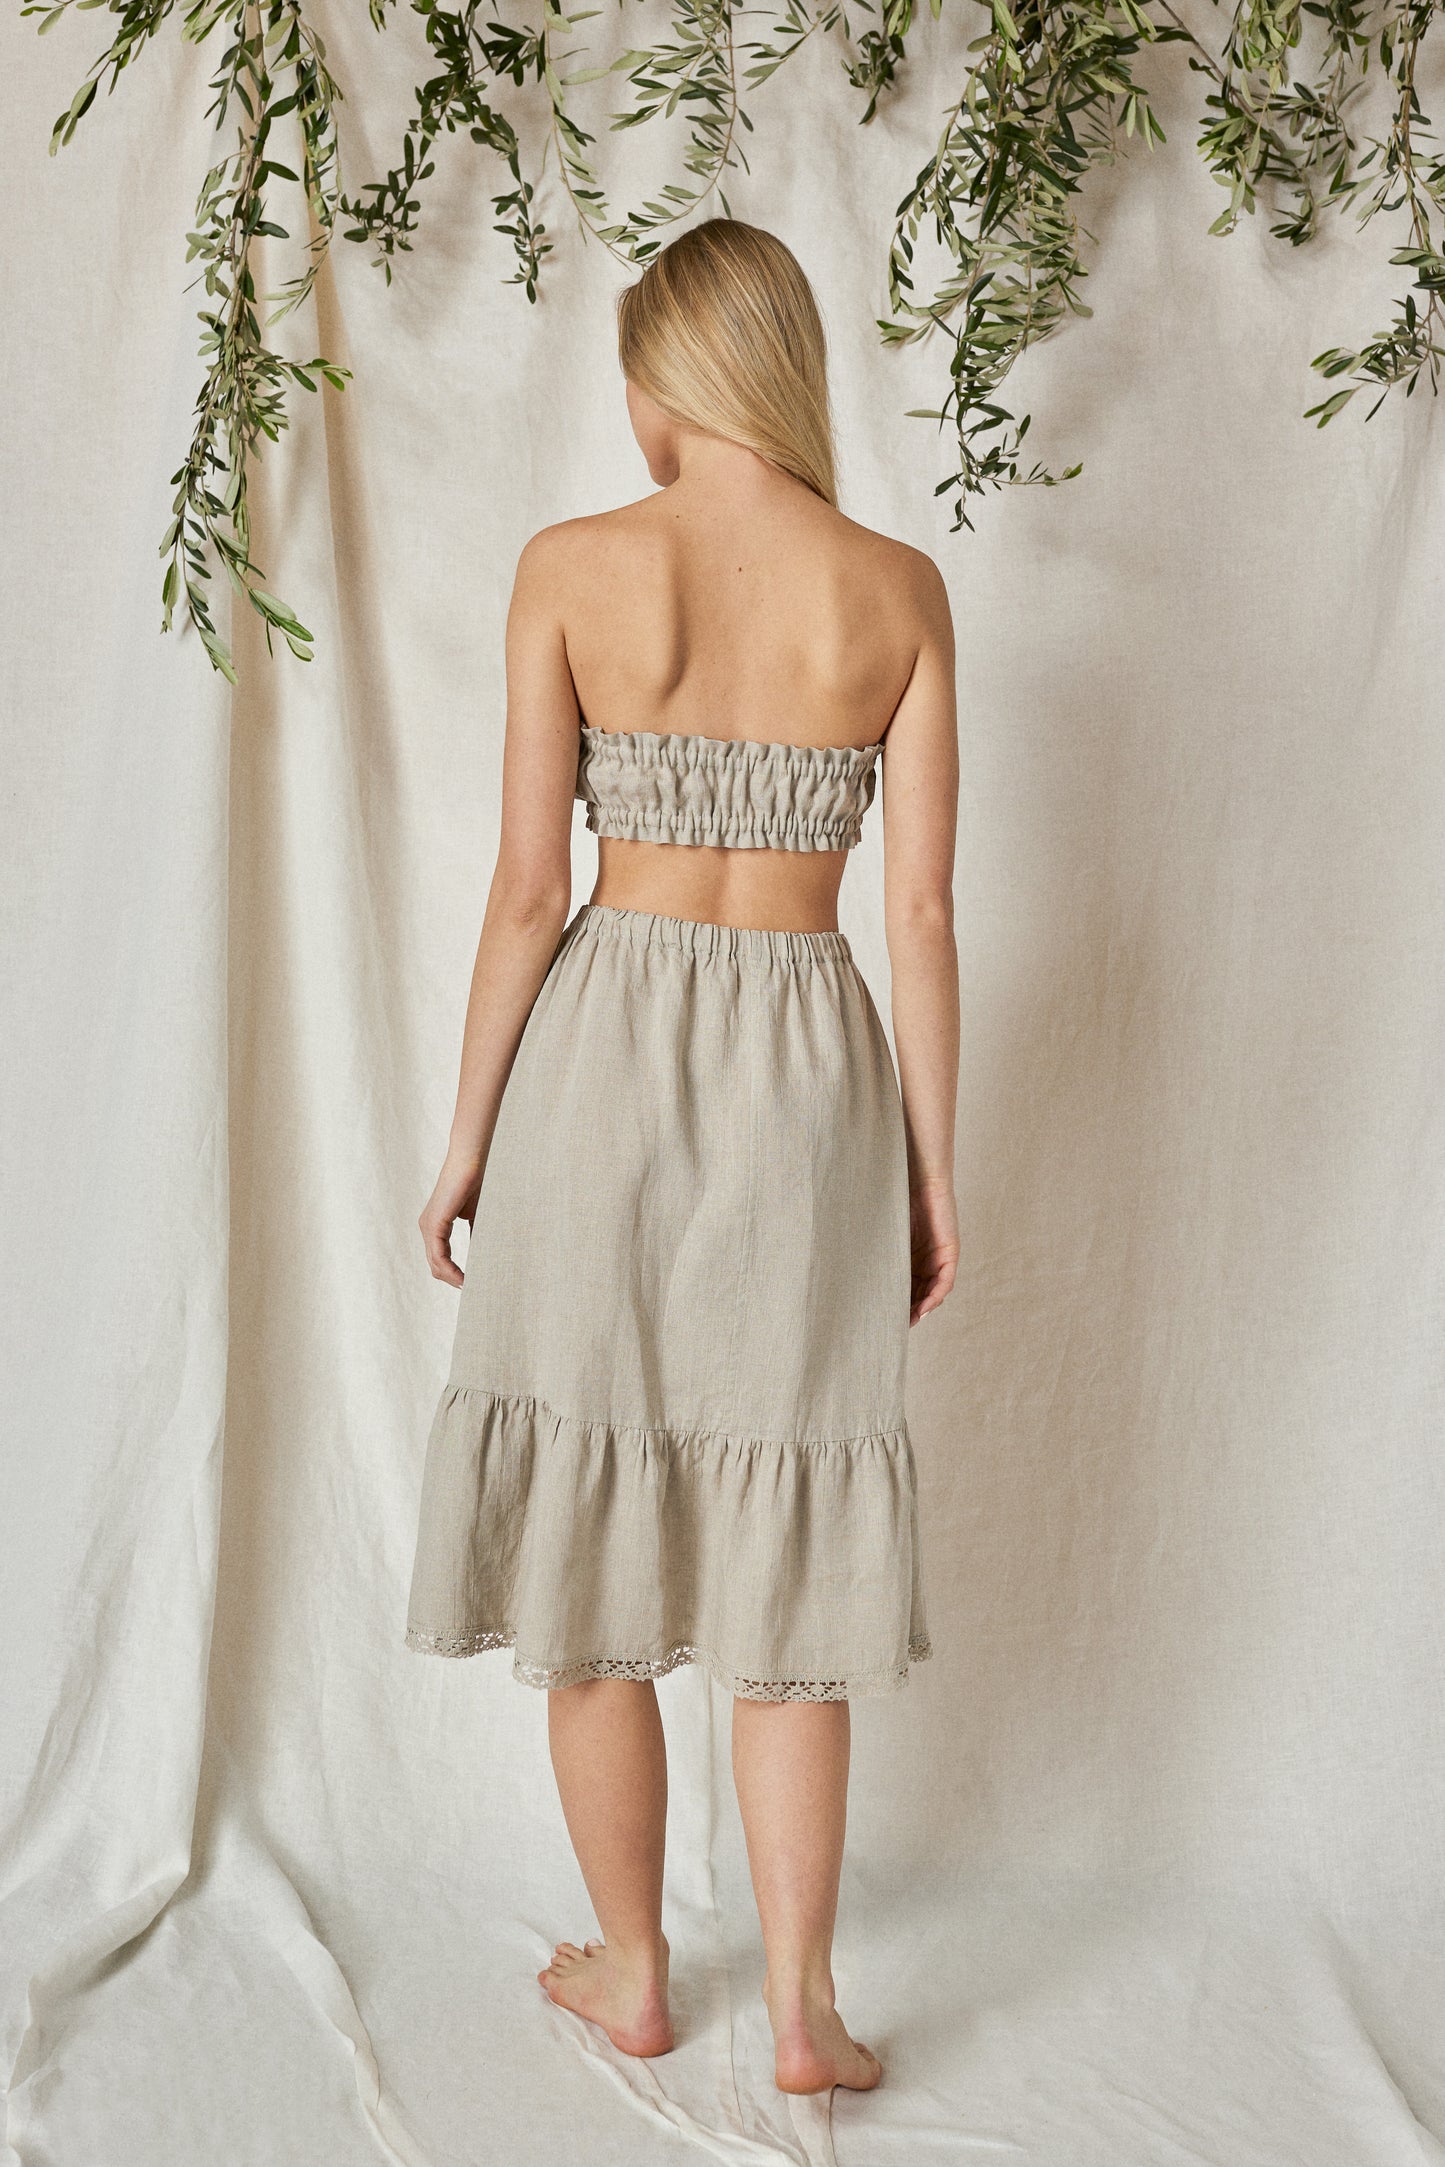  Linen Underskirt with Ruffle and Lace